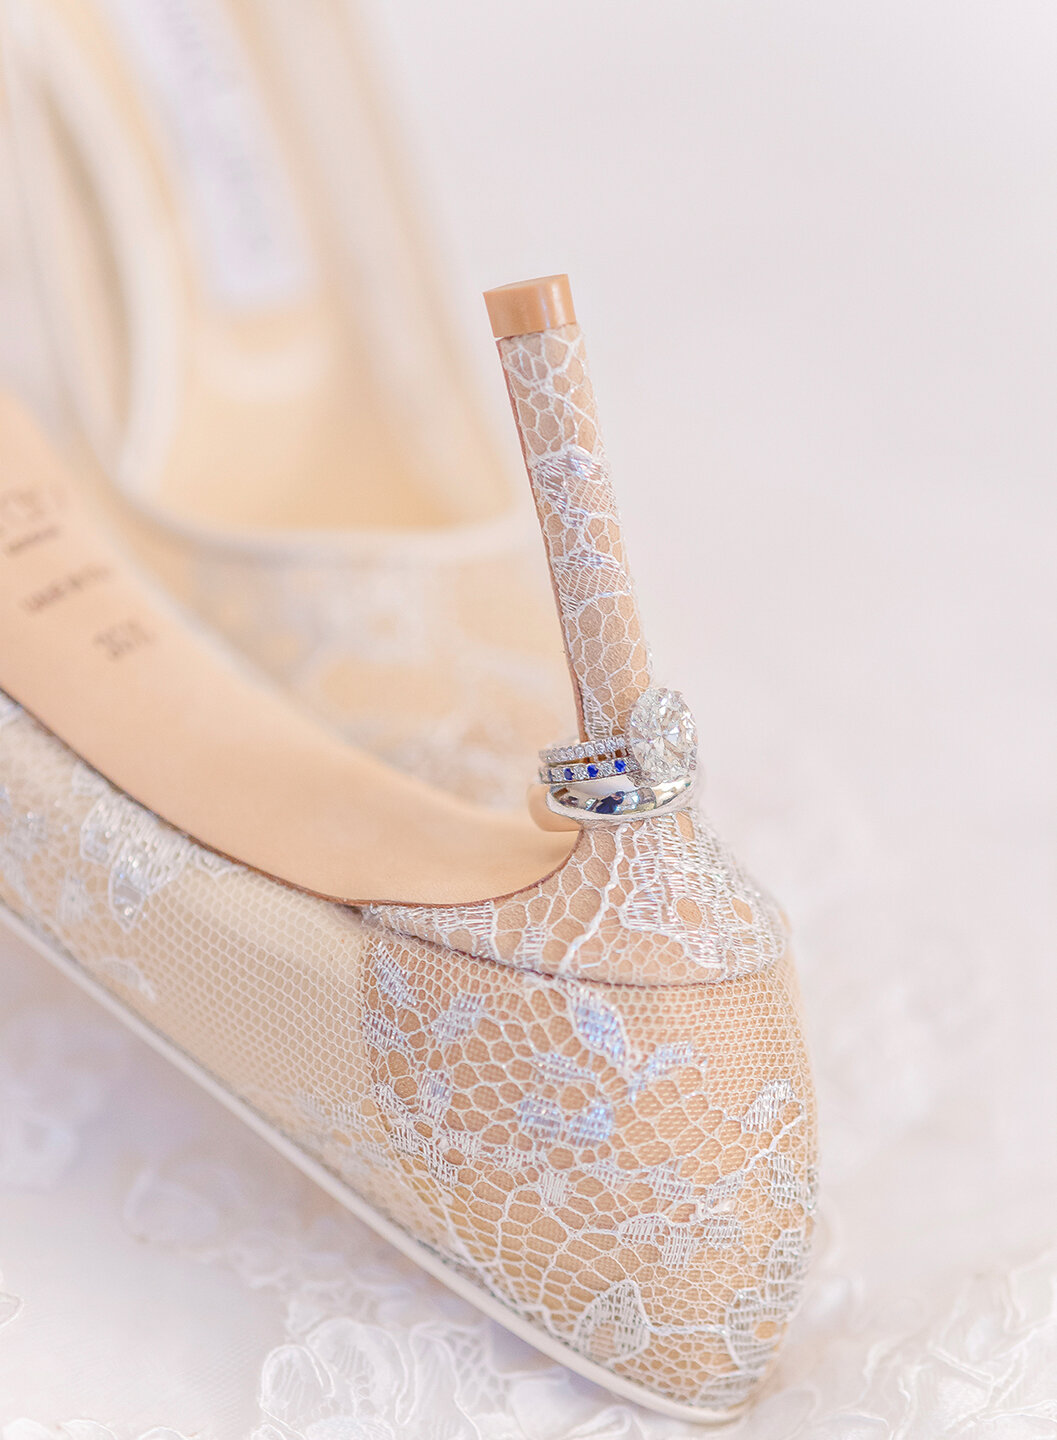 A detail of the bride shoes